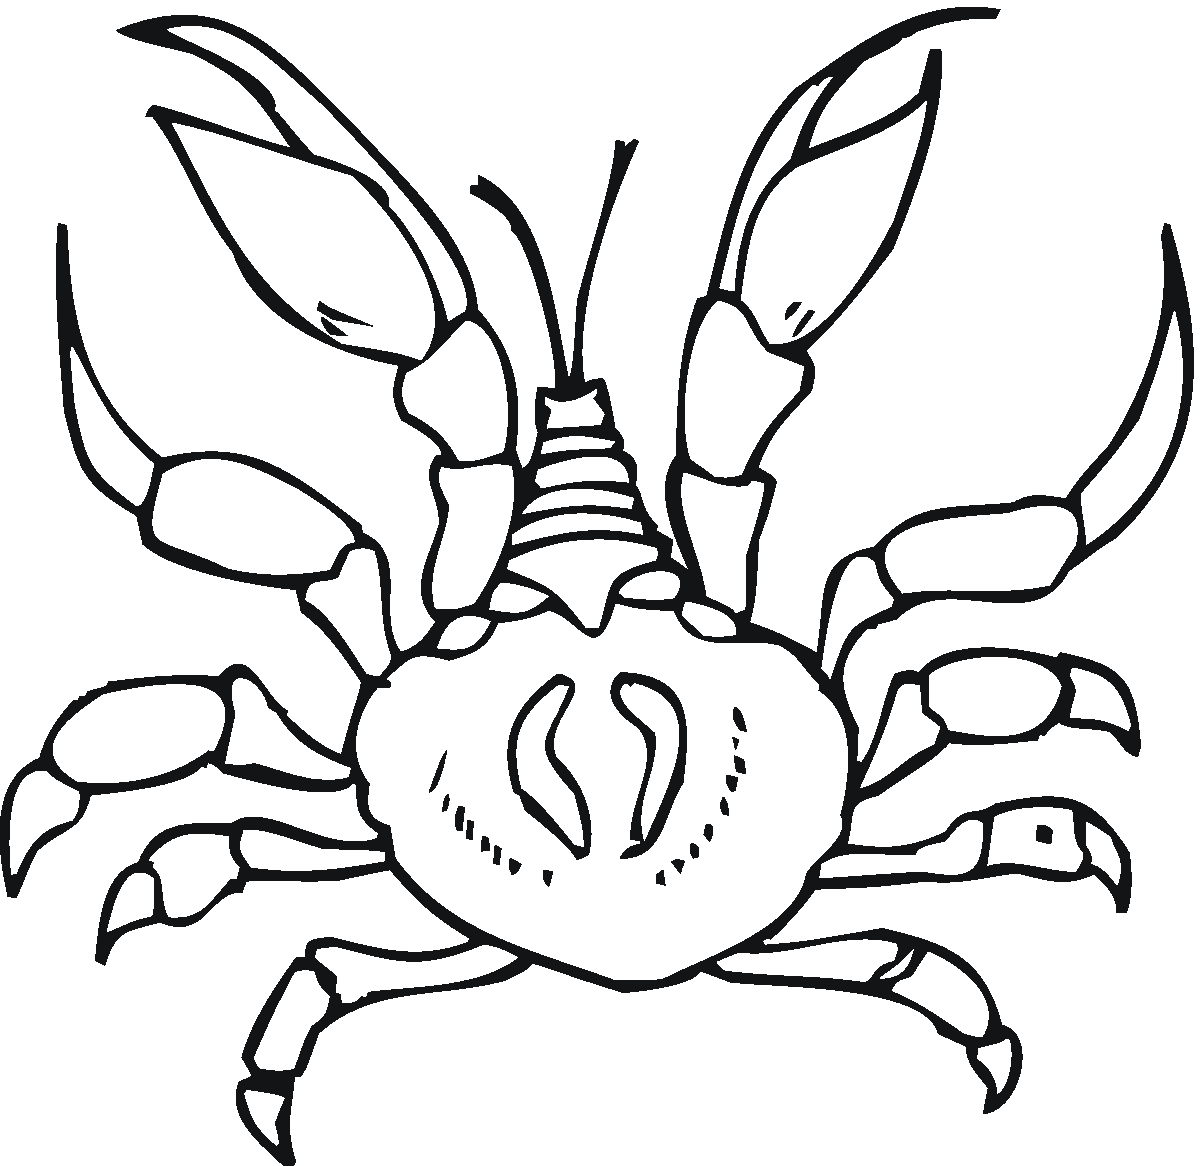 Scary Crab Coloring Page